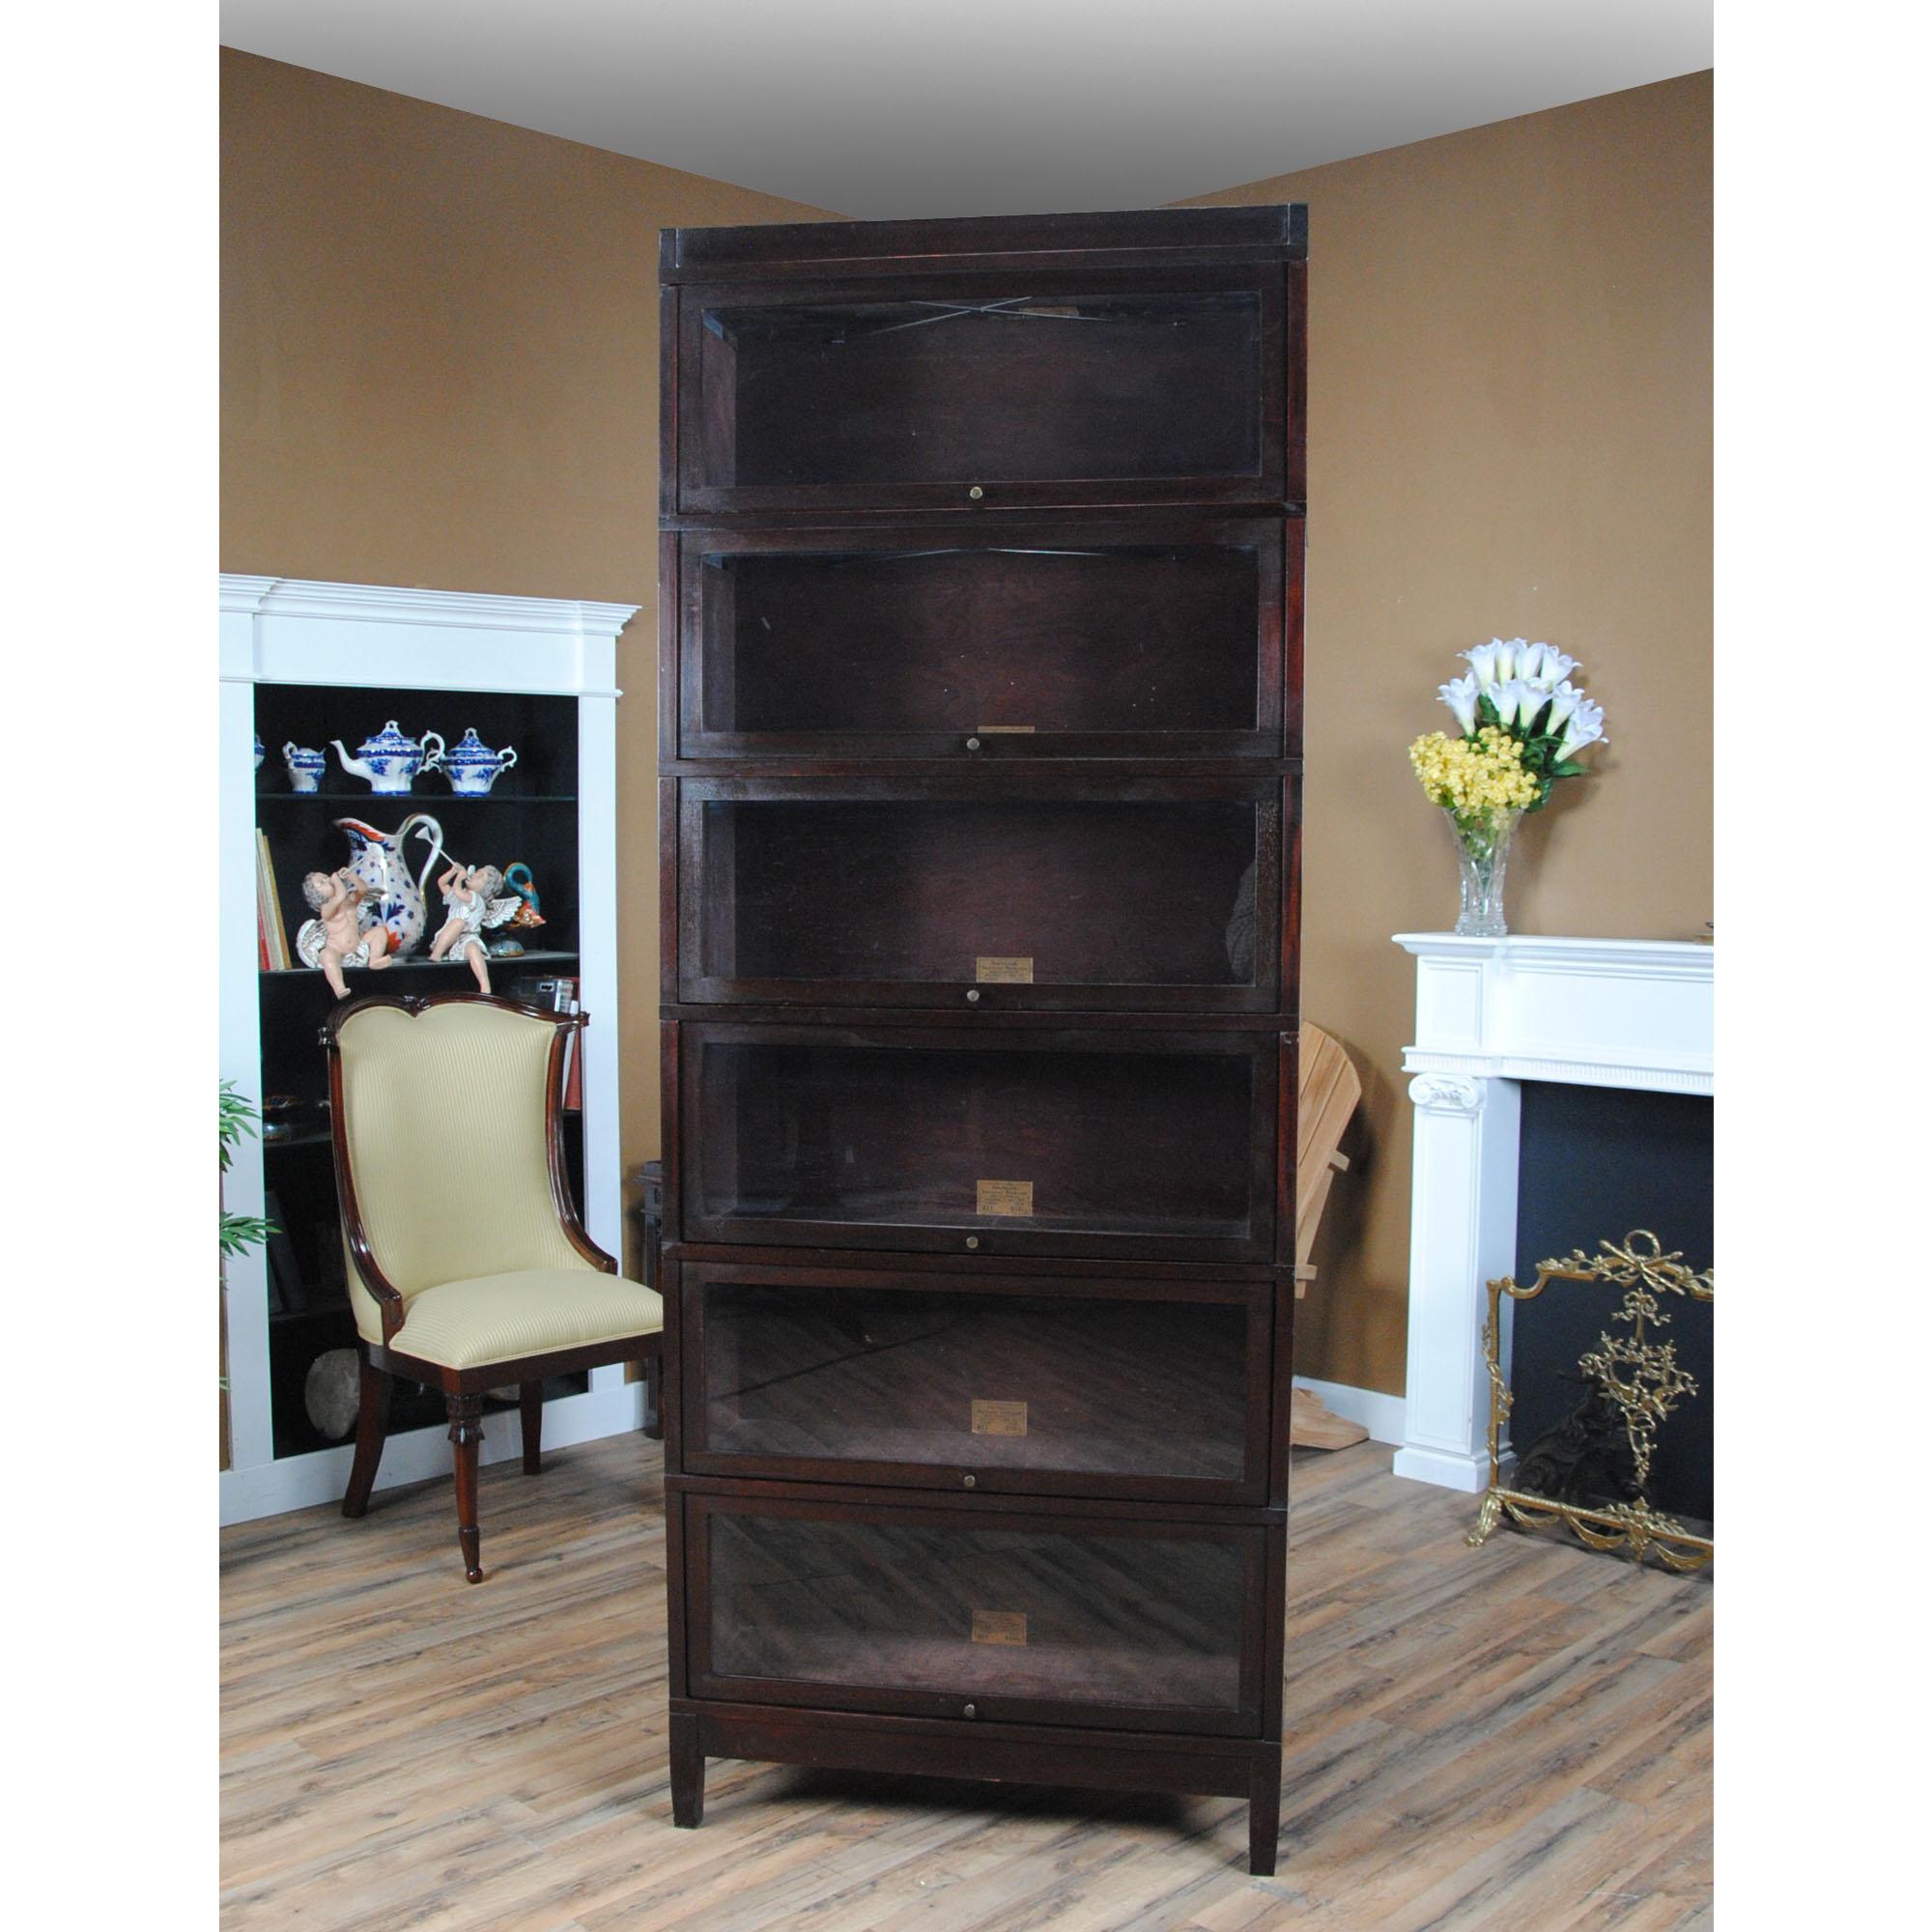 A Vintage Mahogany Globe Wernicke Bookcase – the perfect addition to any home or office space! Crafted from high-quality mahogany wood, this bookcase is about 100 years old but still exudes the same elegance and sophistication as when it was first